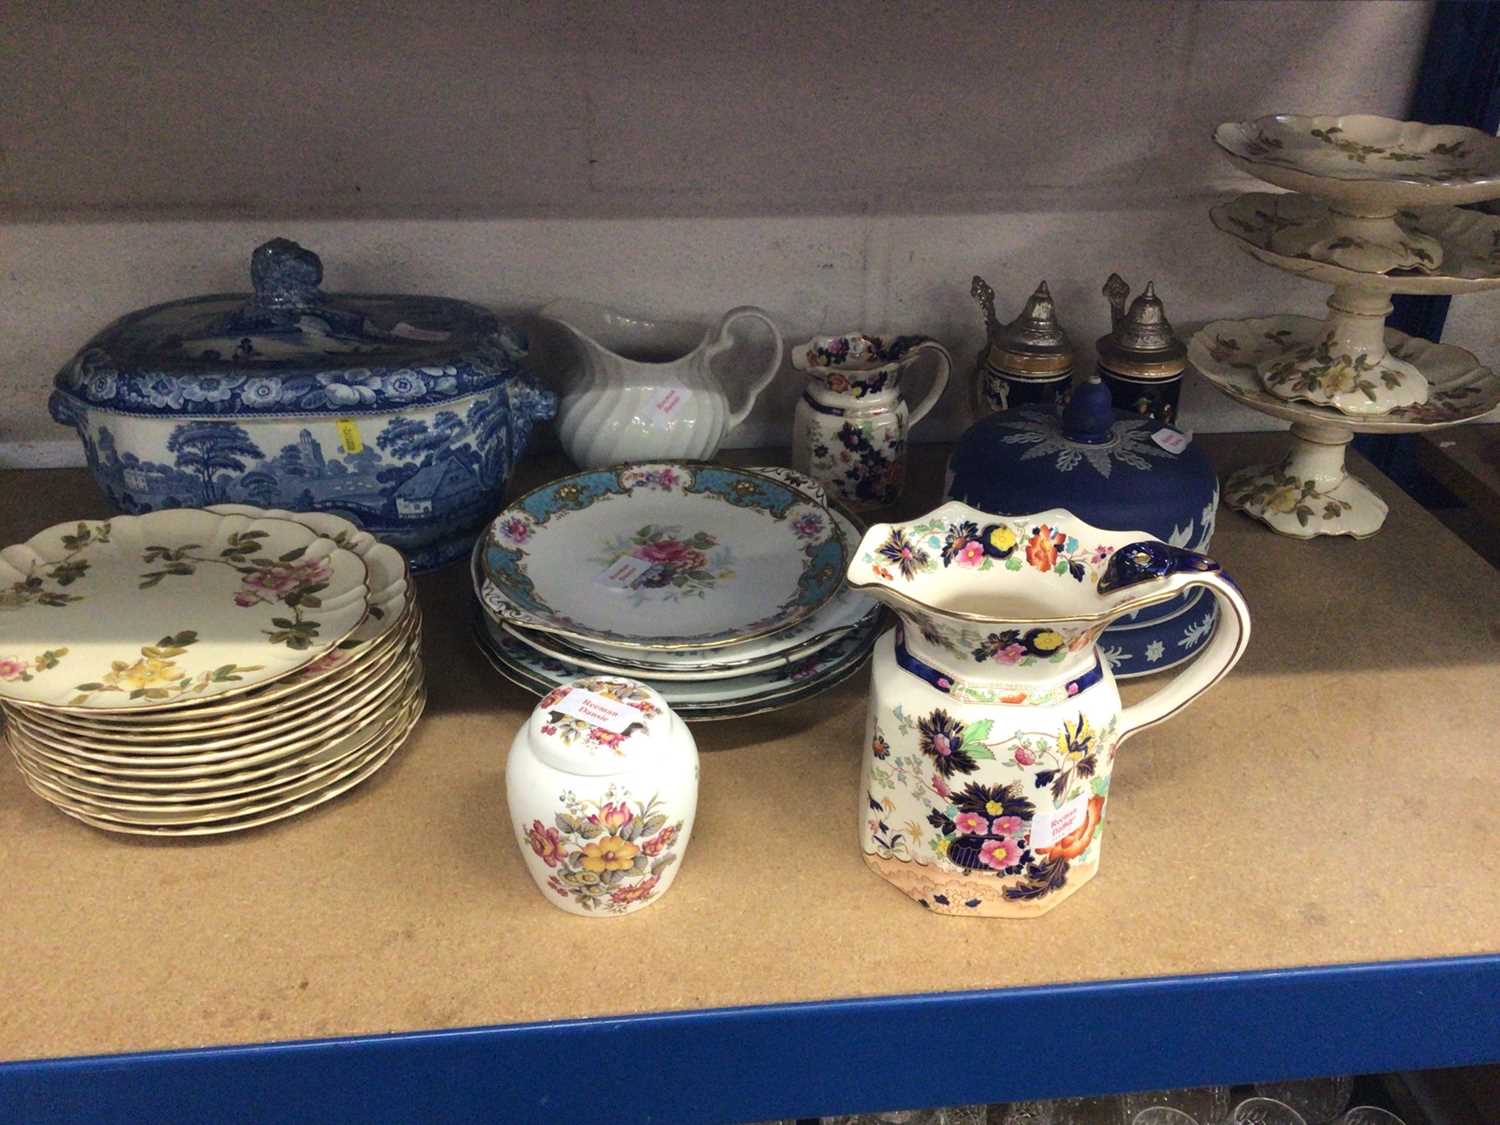 Lot 31 - Quantity of ceramics, including a blue and white tureen, Victorian plates, Masons jugs, etc